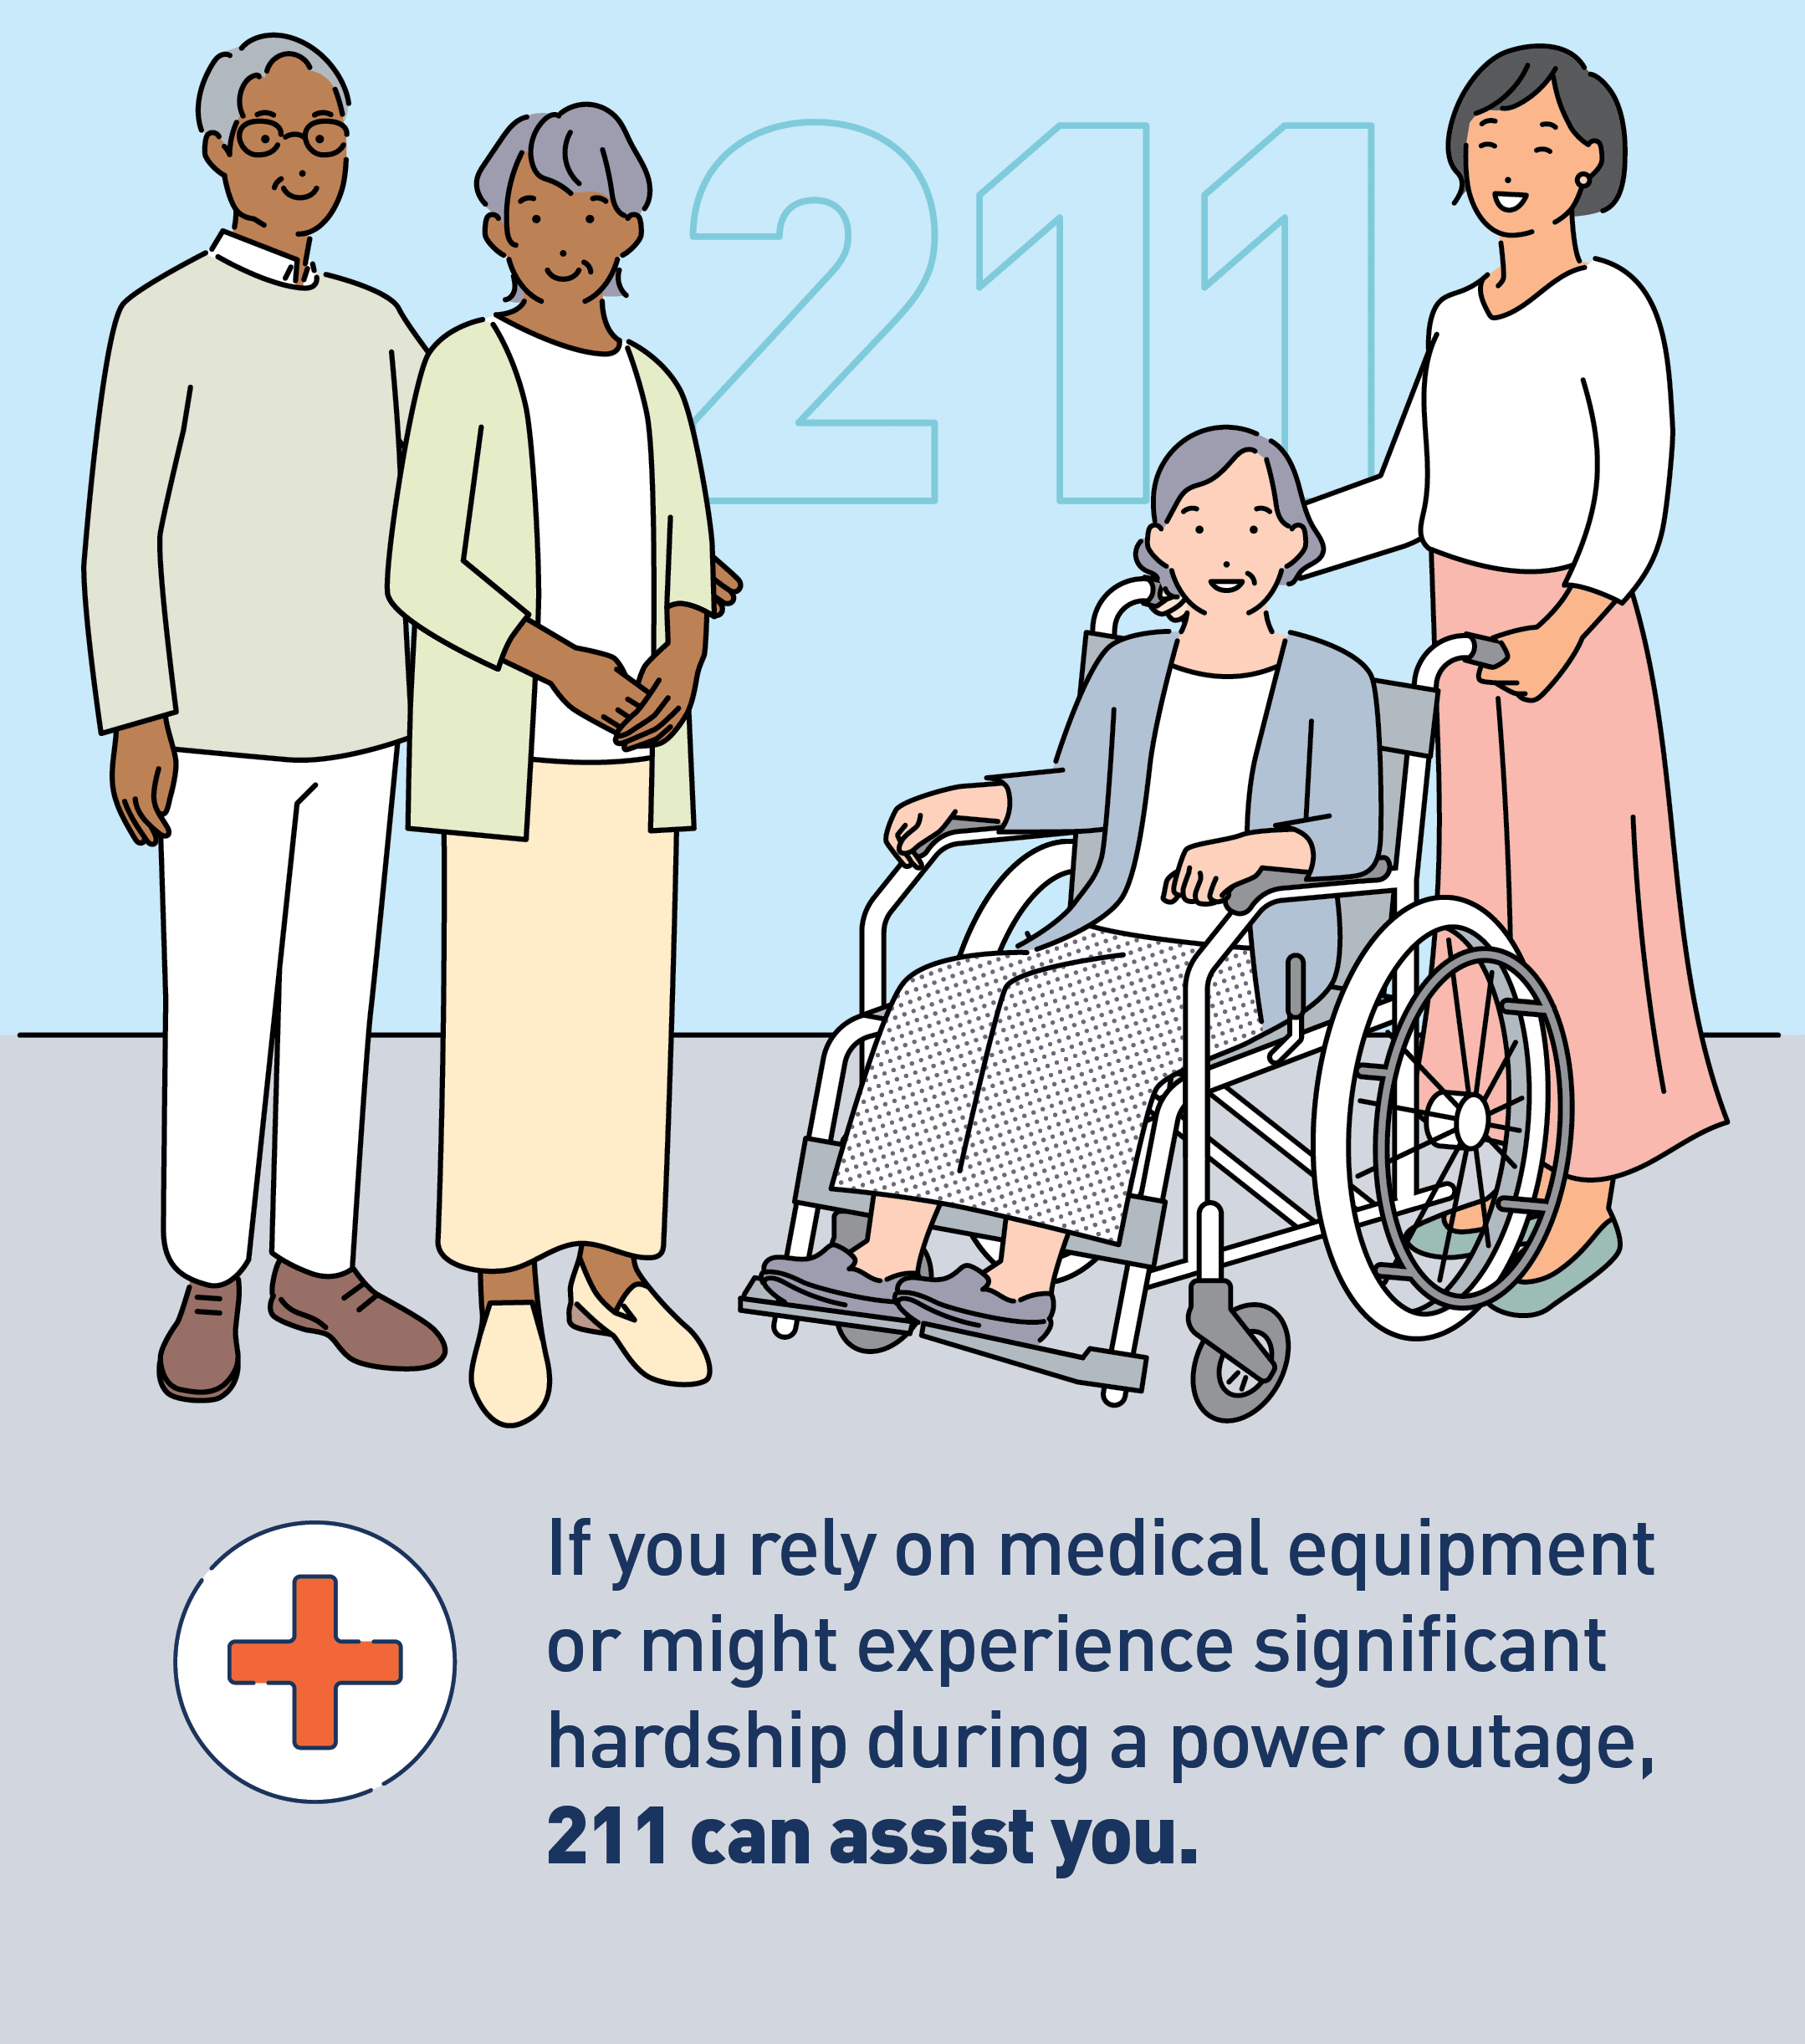 Graphic of elderly folks and individuals with disabilities.